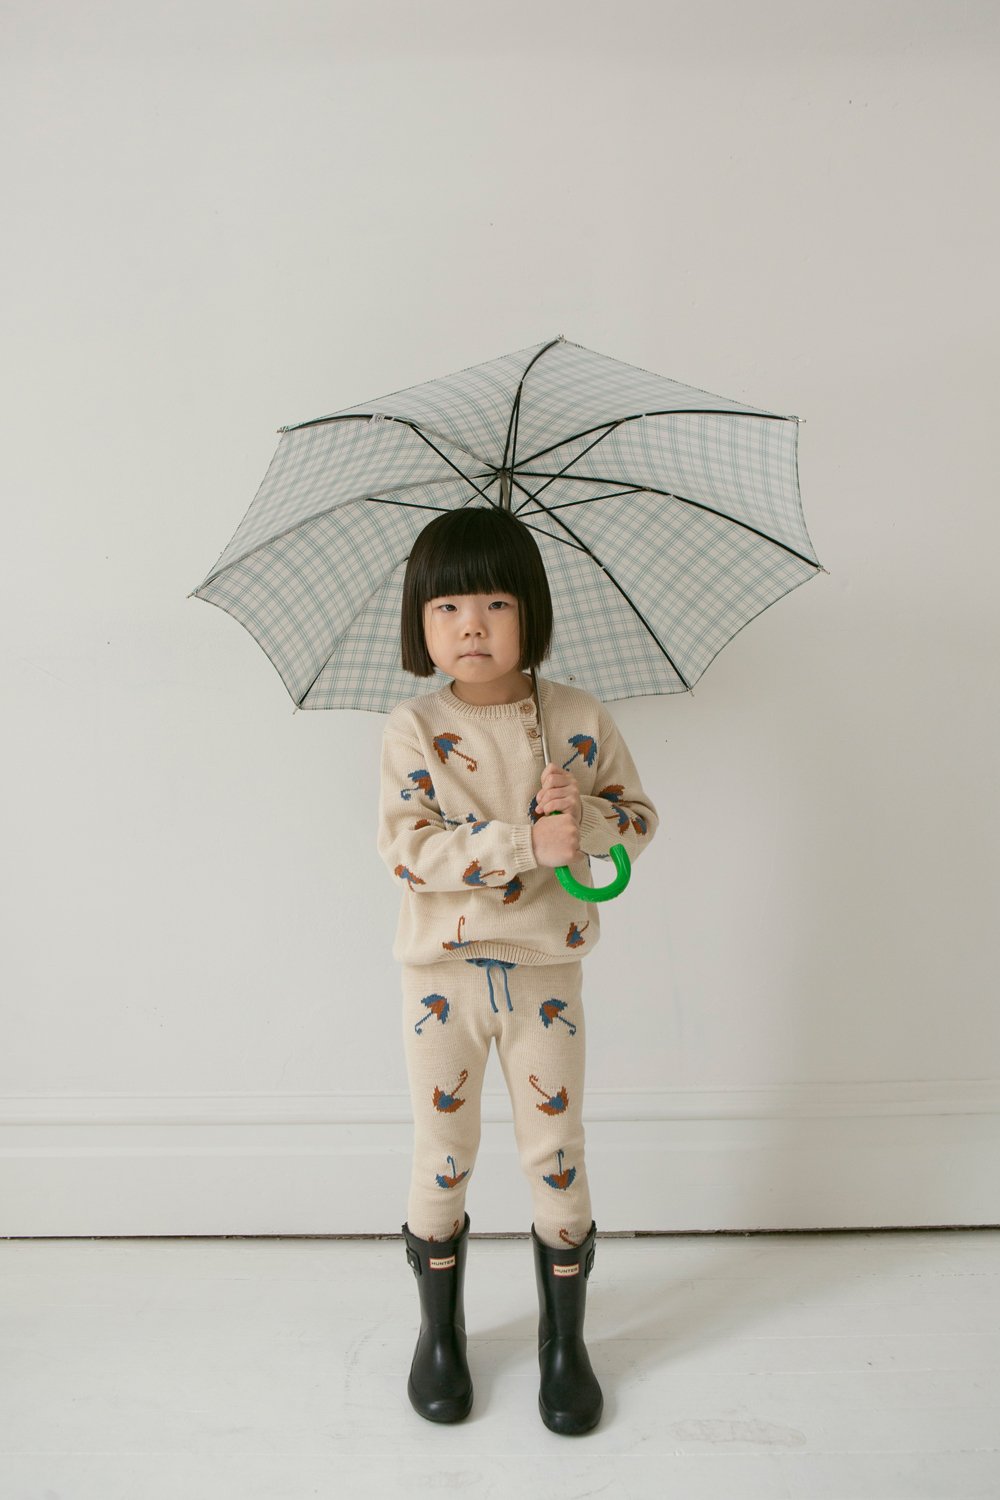 Fin and Vince Ribbed Knit Top in Sand Umbrella | 30% OFF SALE | Children of the Wild